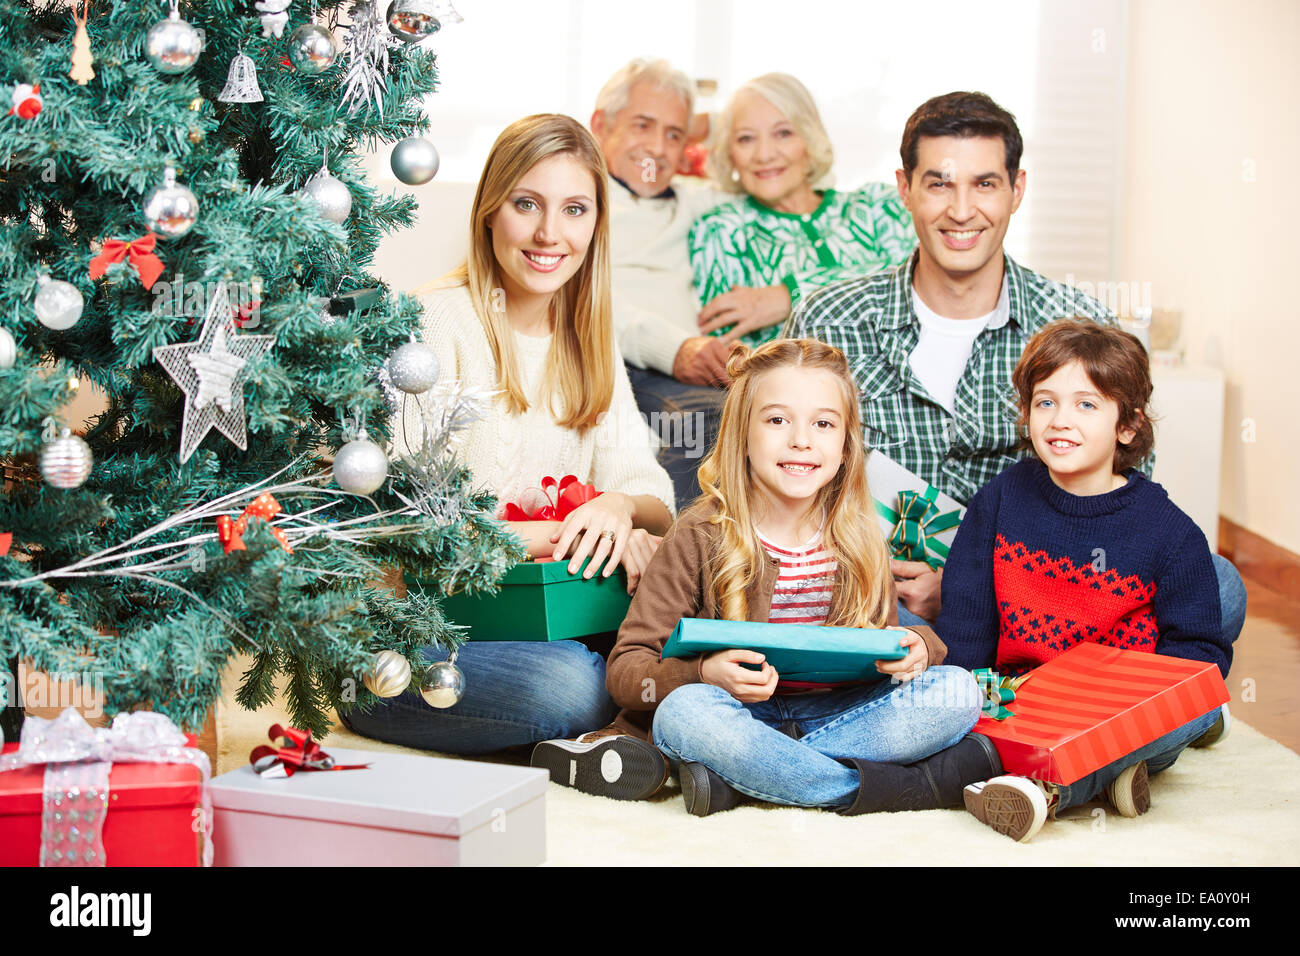 Family celebrating christmas with three generations under tree with gifts Stock Photo